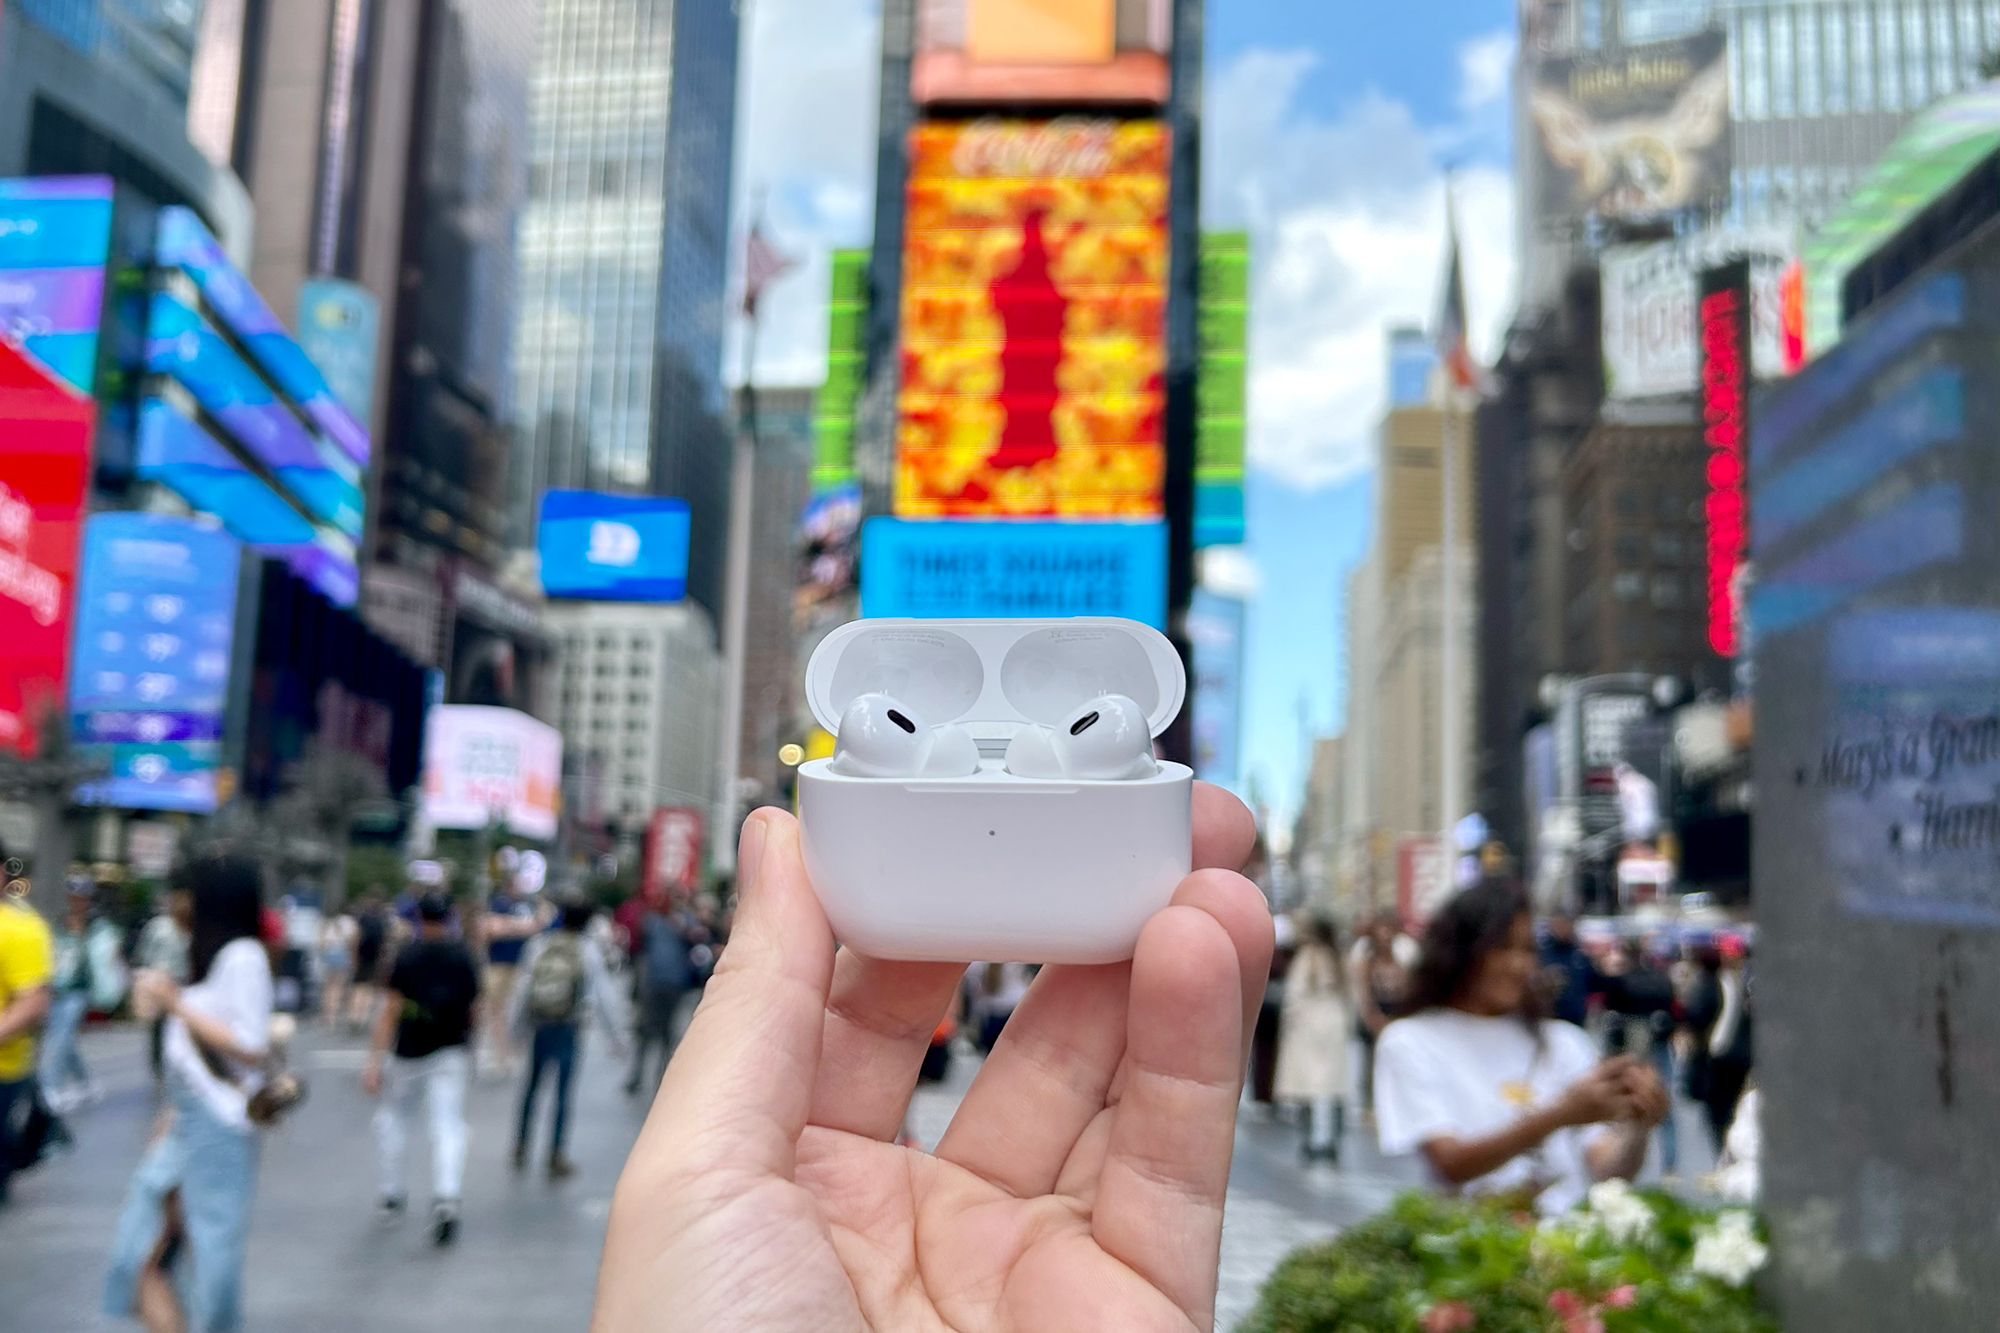 AirPods Pro 2nd Generation Review